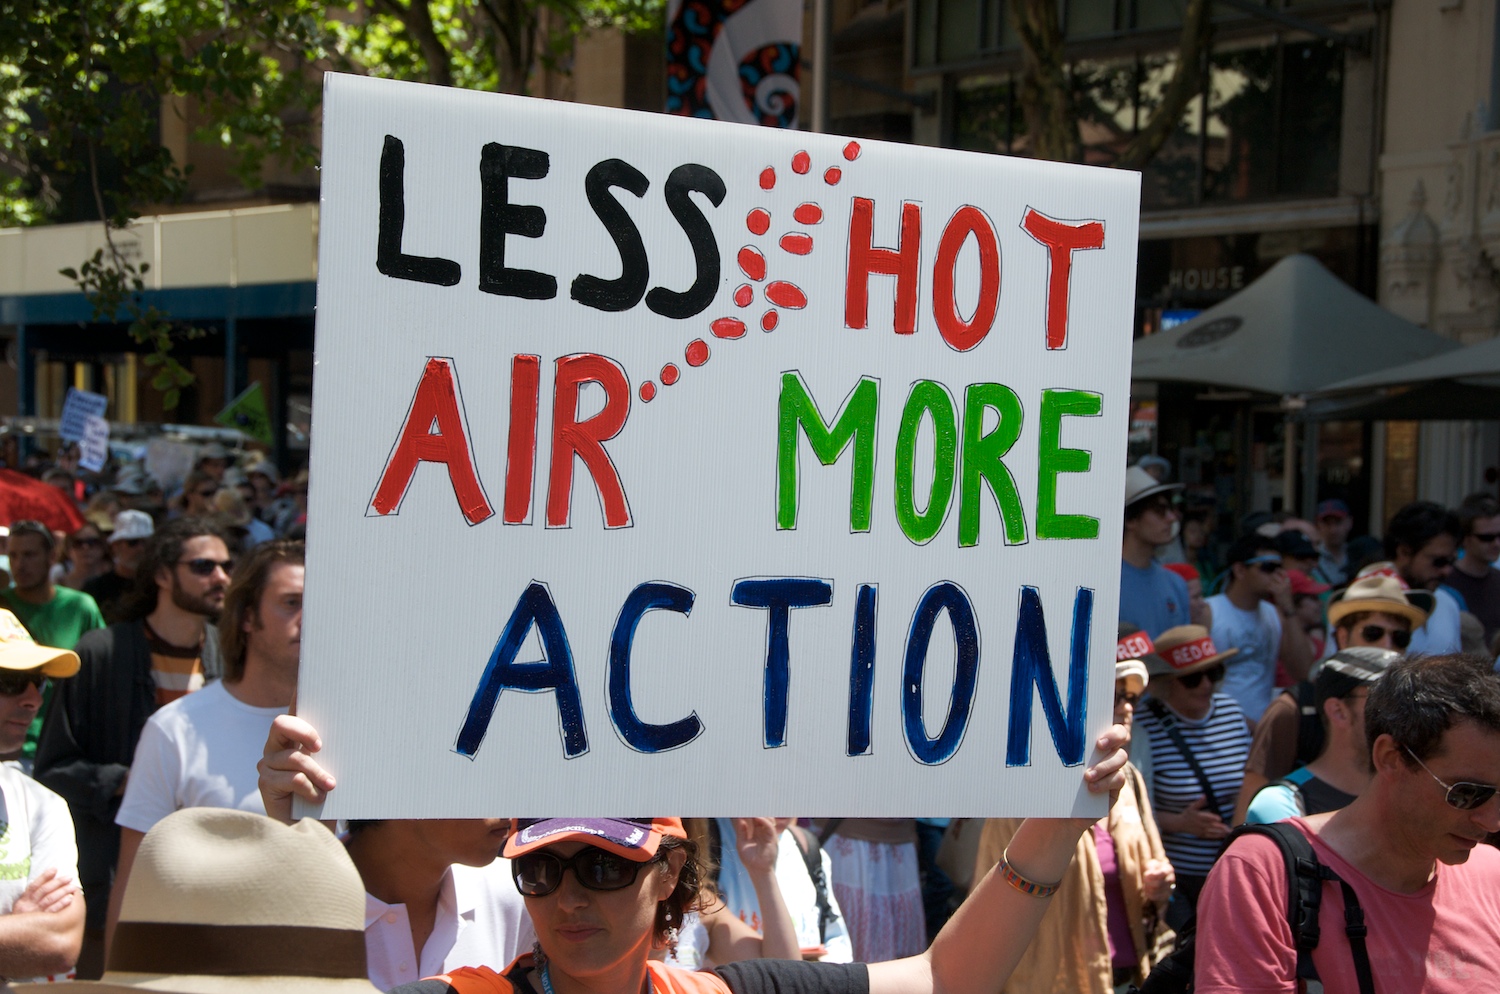 Less hot air, more action: A protest sign in Sydney